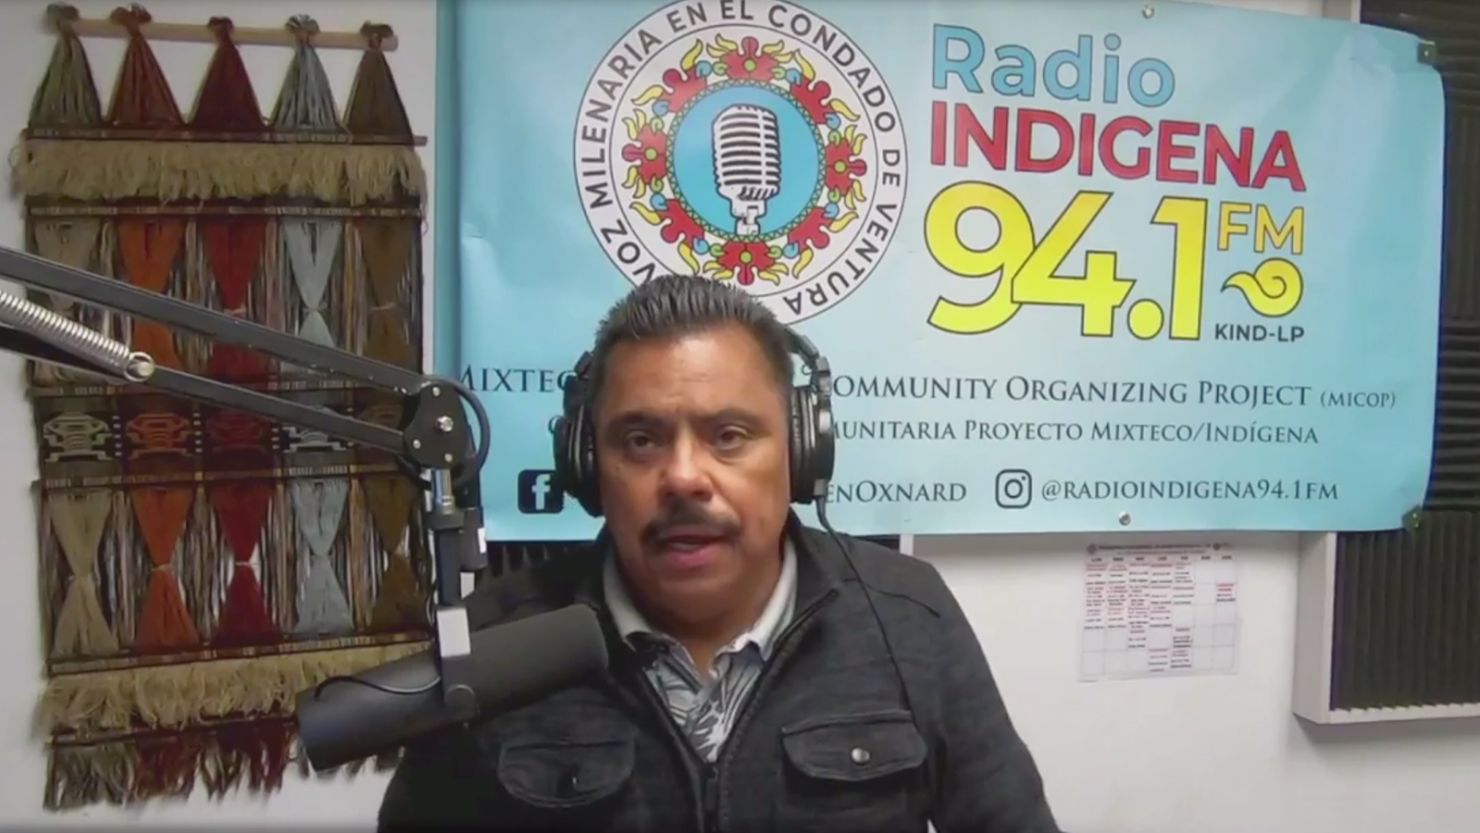 Francisco Didier Ulloa and a colleague host a show on Radio Indígena in Spanish and Mixteco, a indigenous Mexican language.